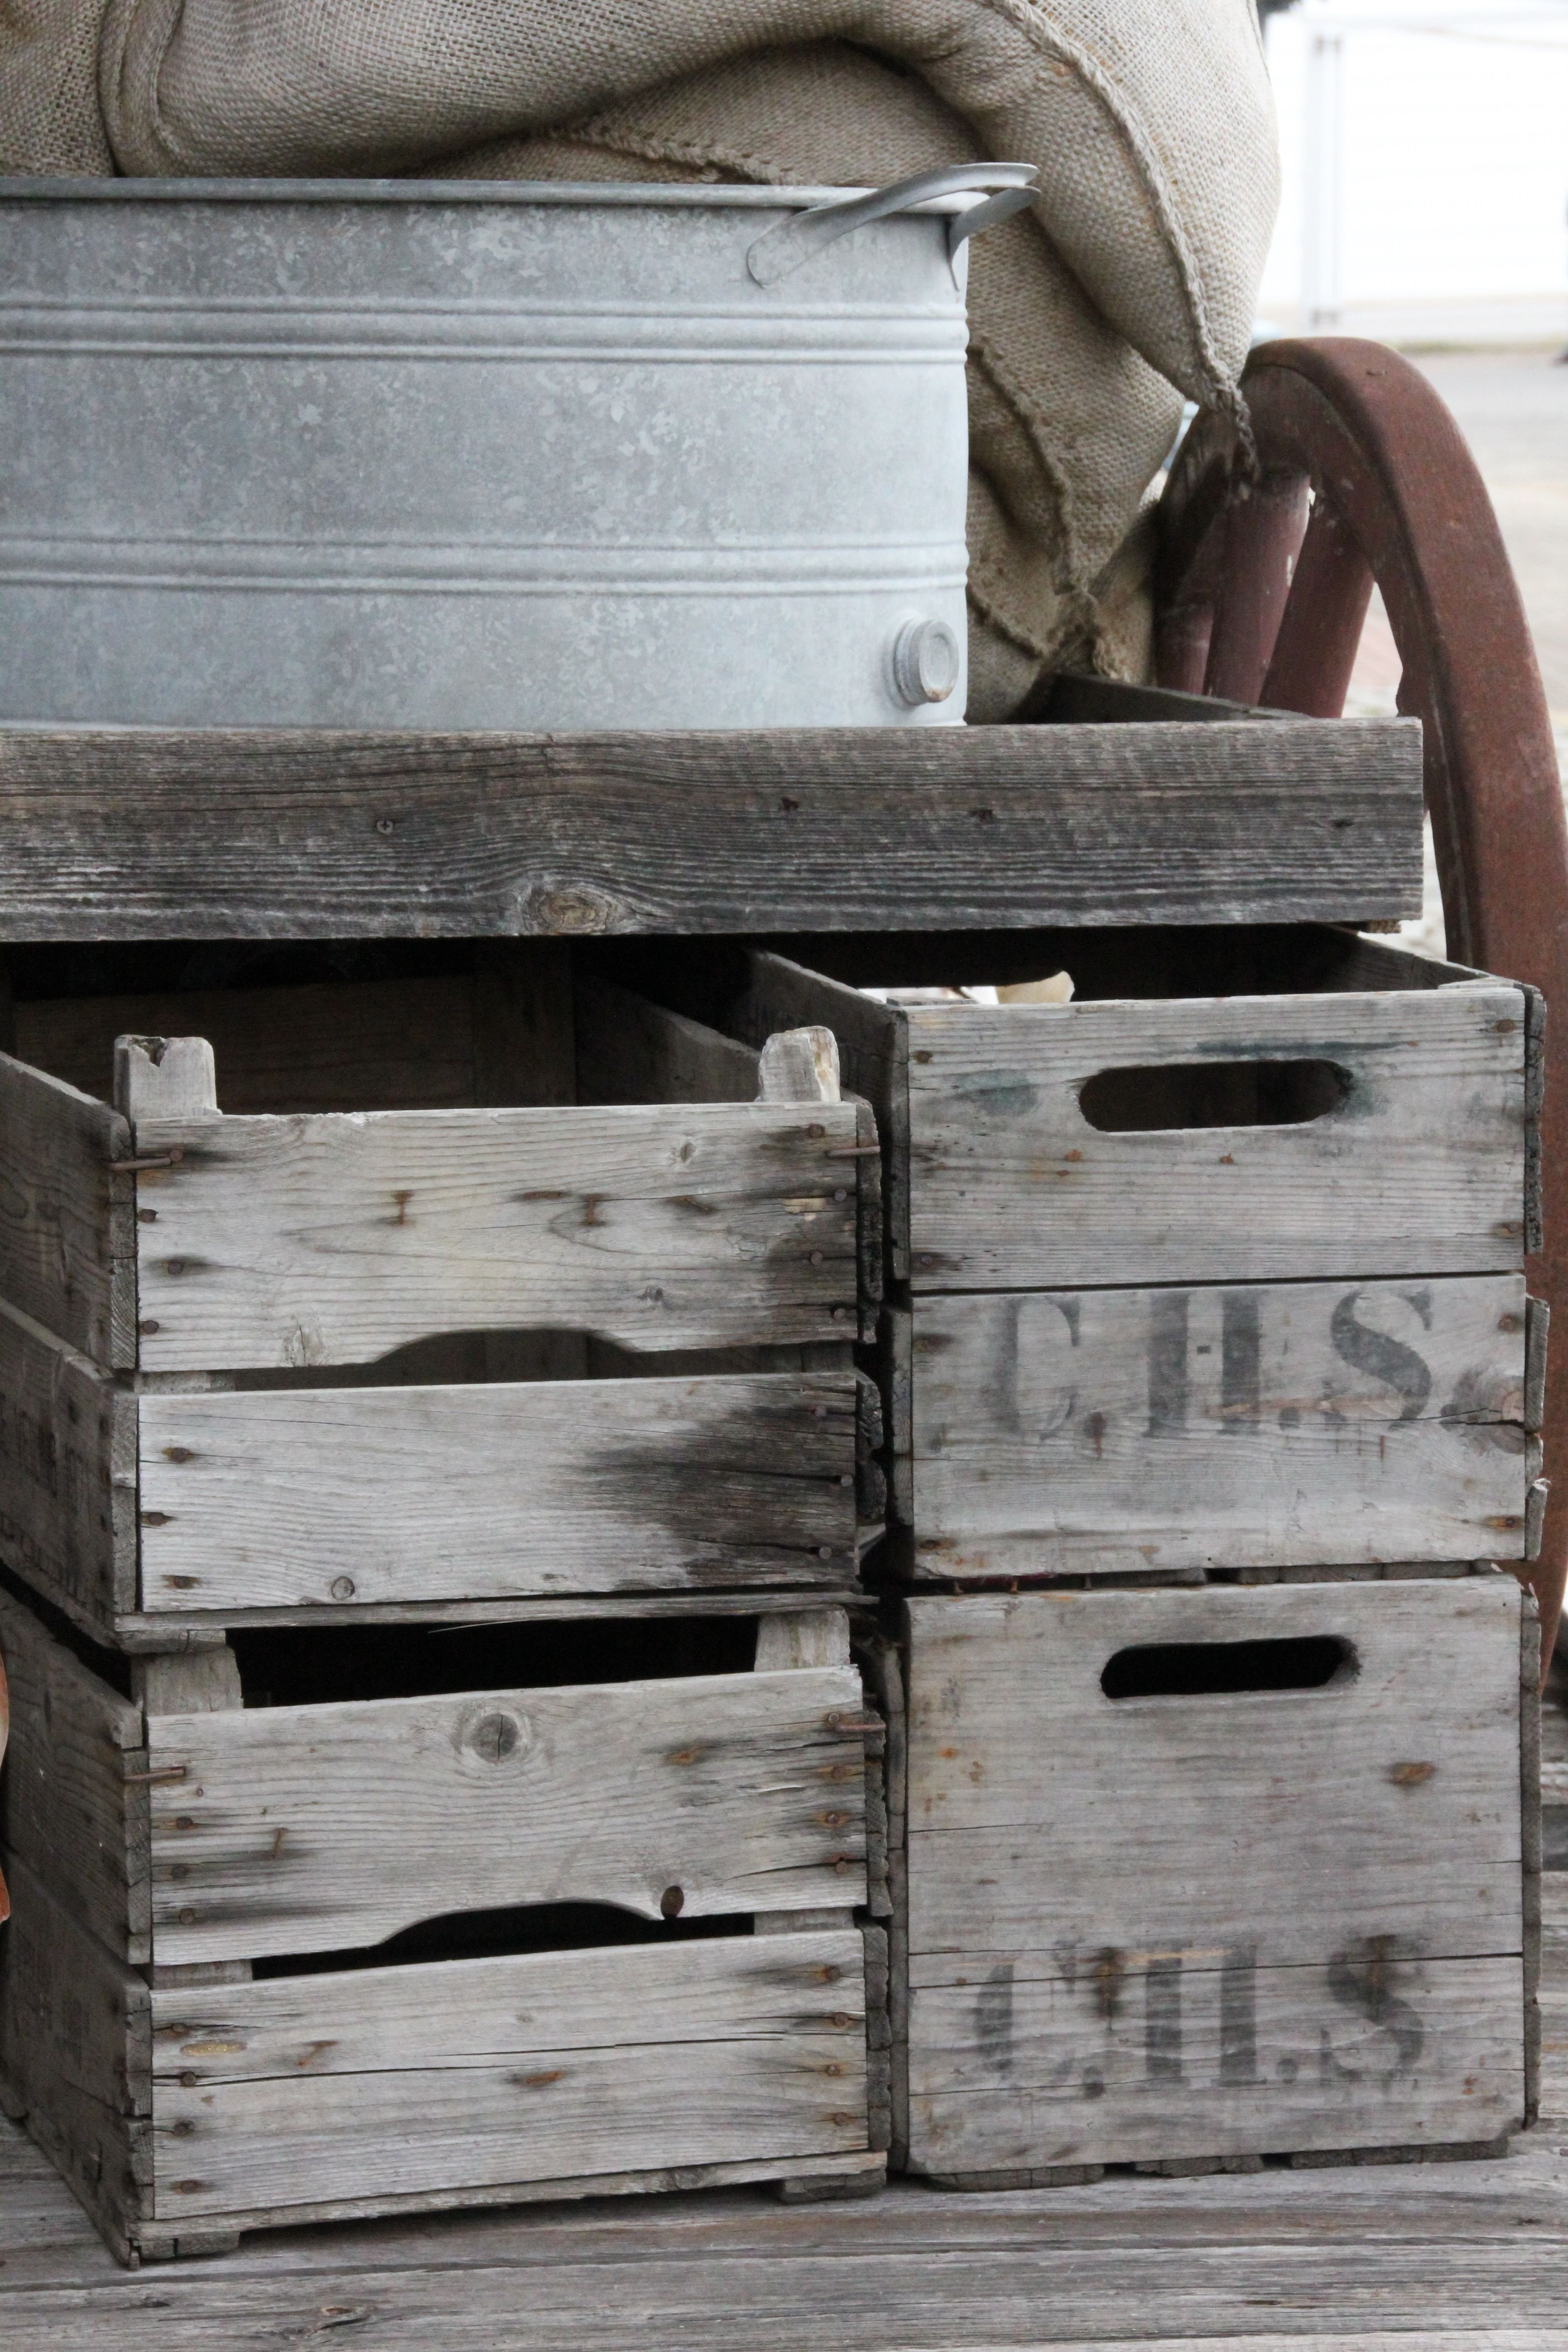 gray metal bucket and brown wooden crates